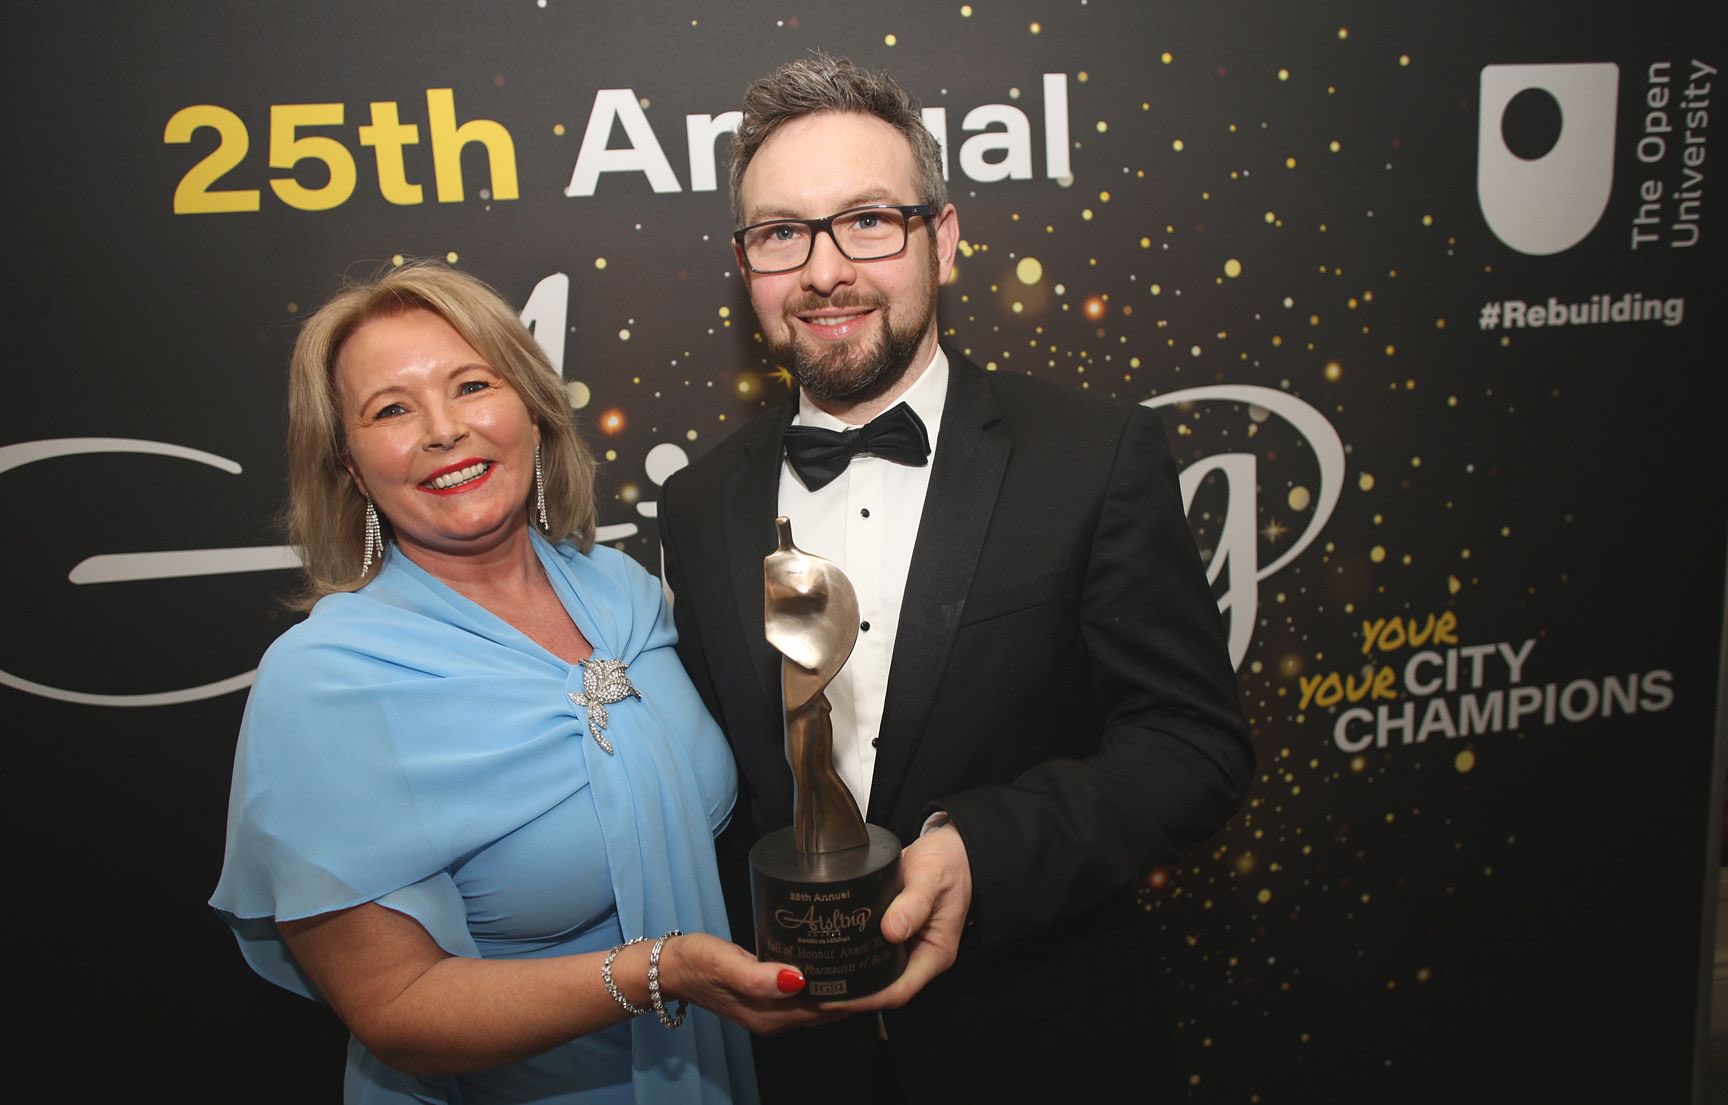 Local community pharmacists honoured at Aisling Awards recognising the best of Belfast